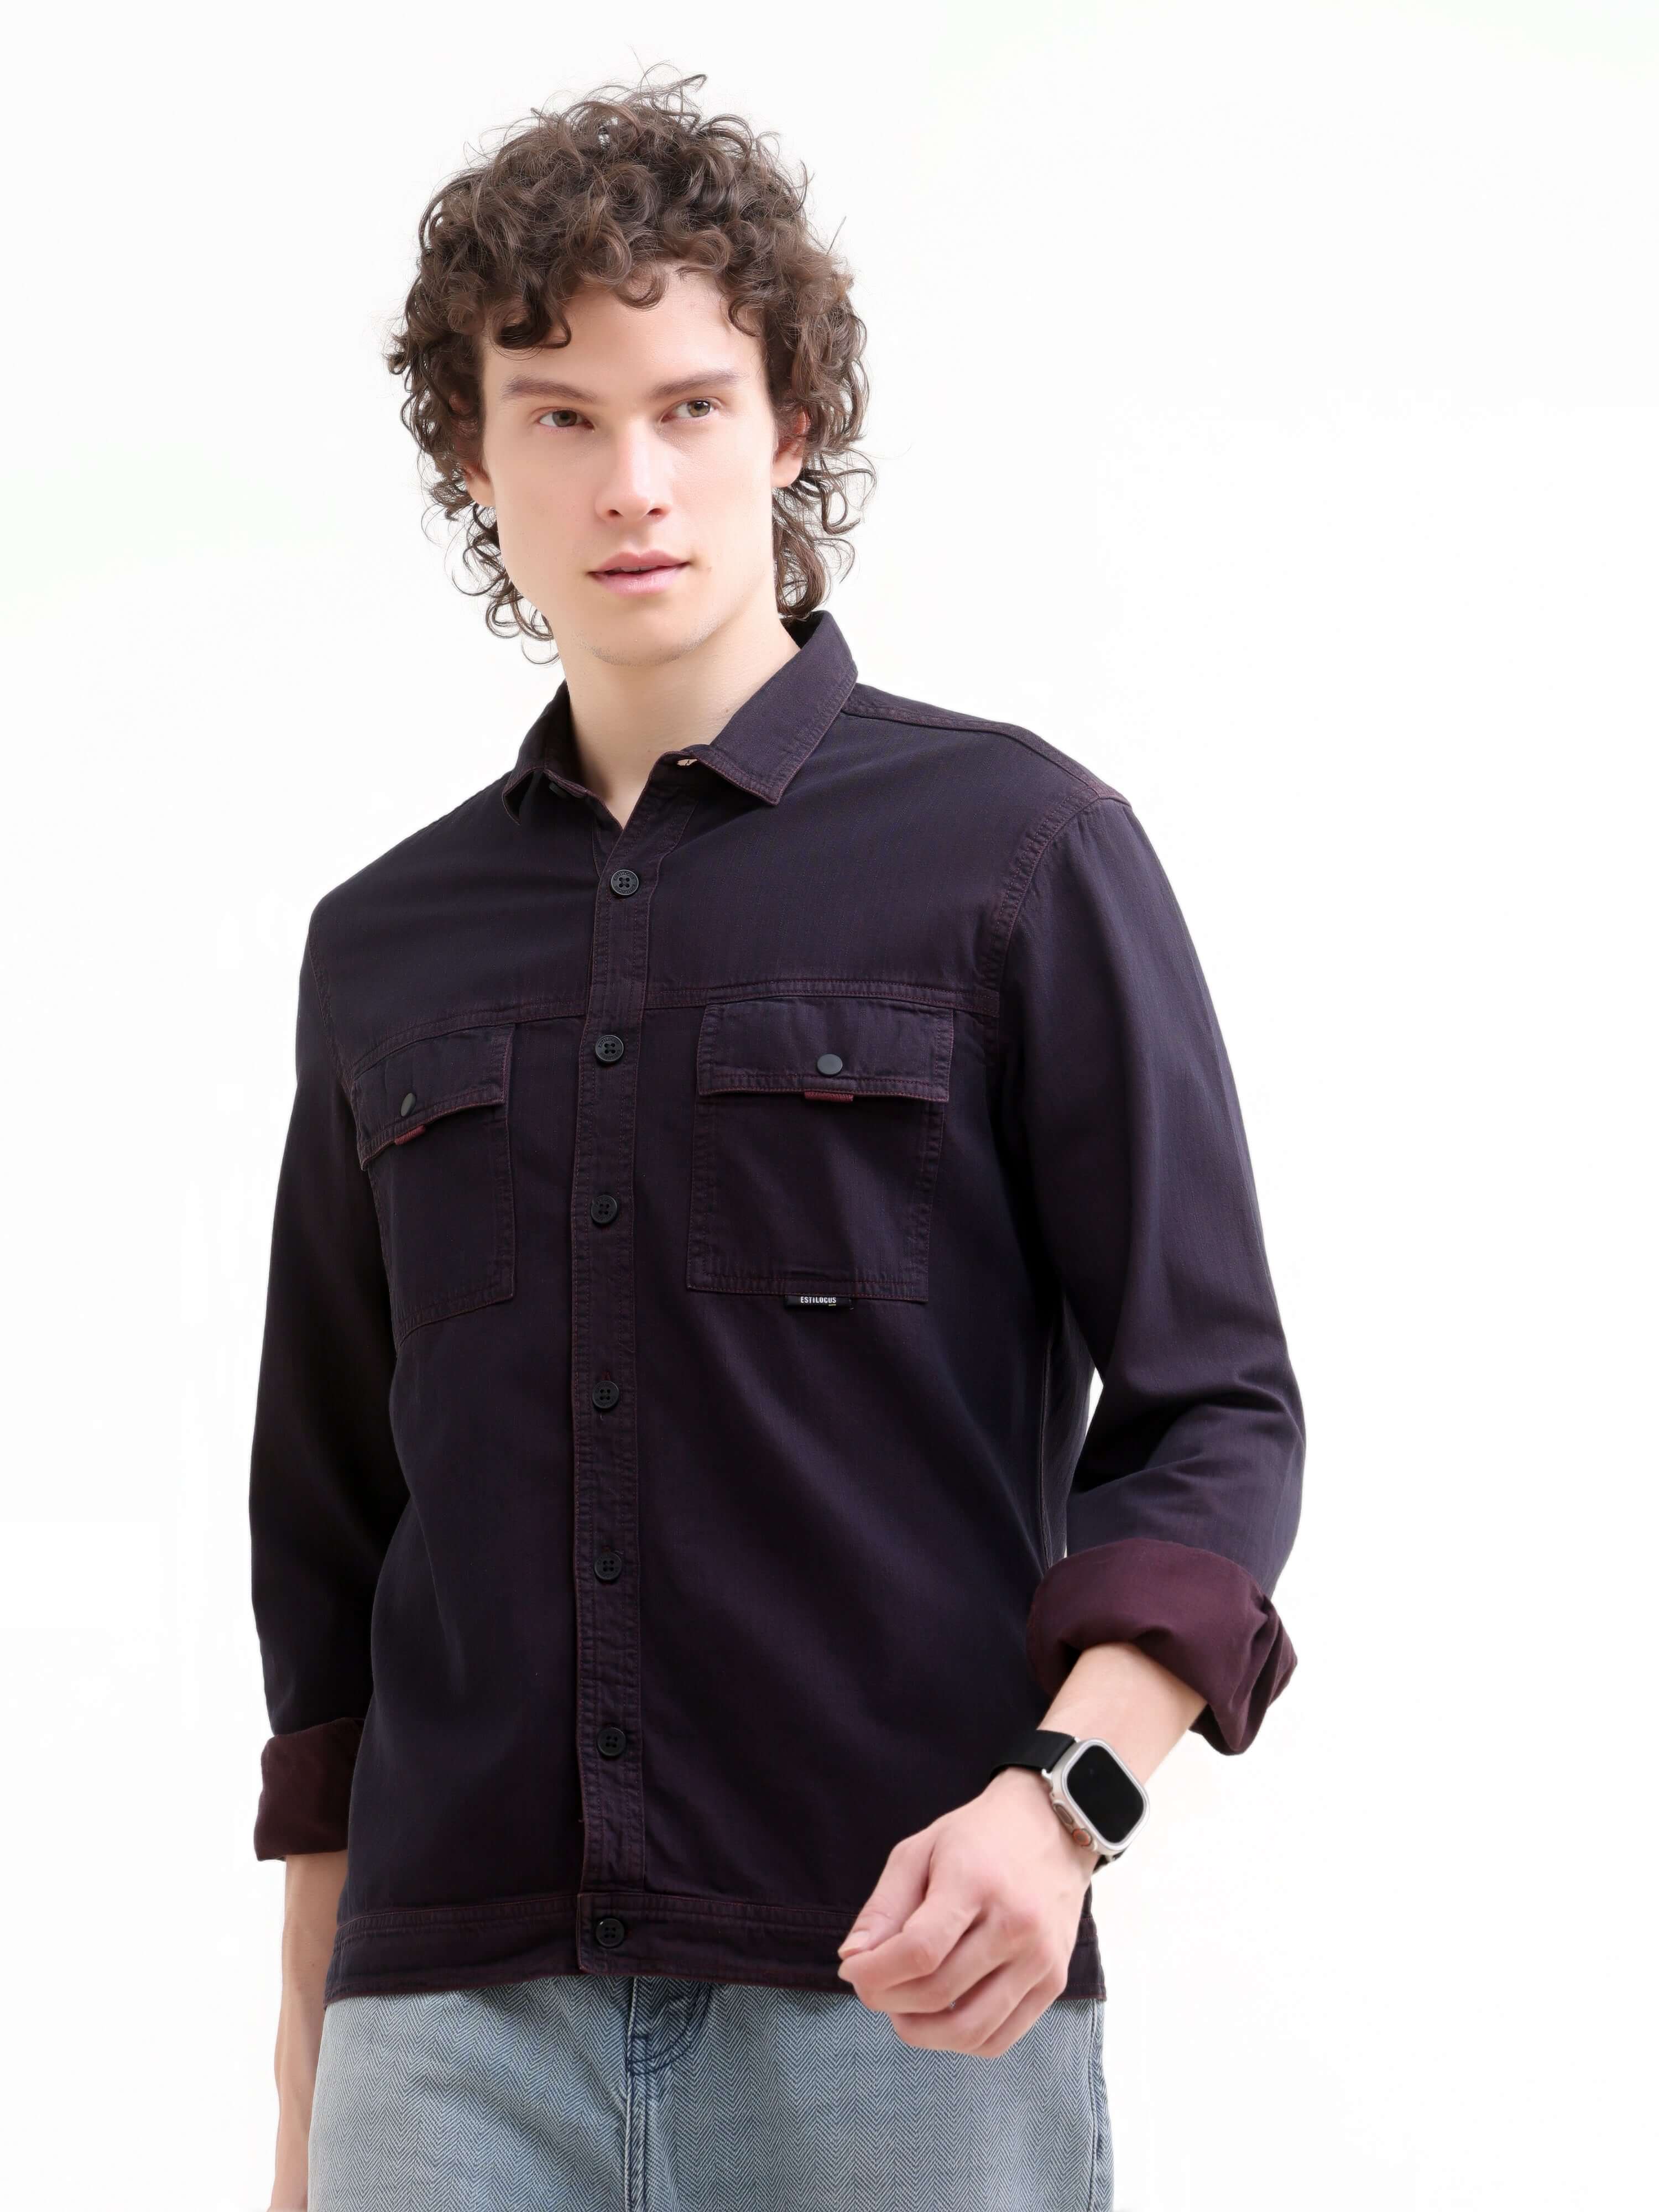 Rubans Indigo Denim Overshirt - Men's Casual Wear shop online at Estilocus. Shop the latest Rubans wine denim overshirt. A new color classic with a timeless Indigo dye for durability and style. Perfect for any casual look.